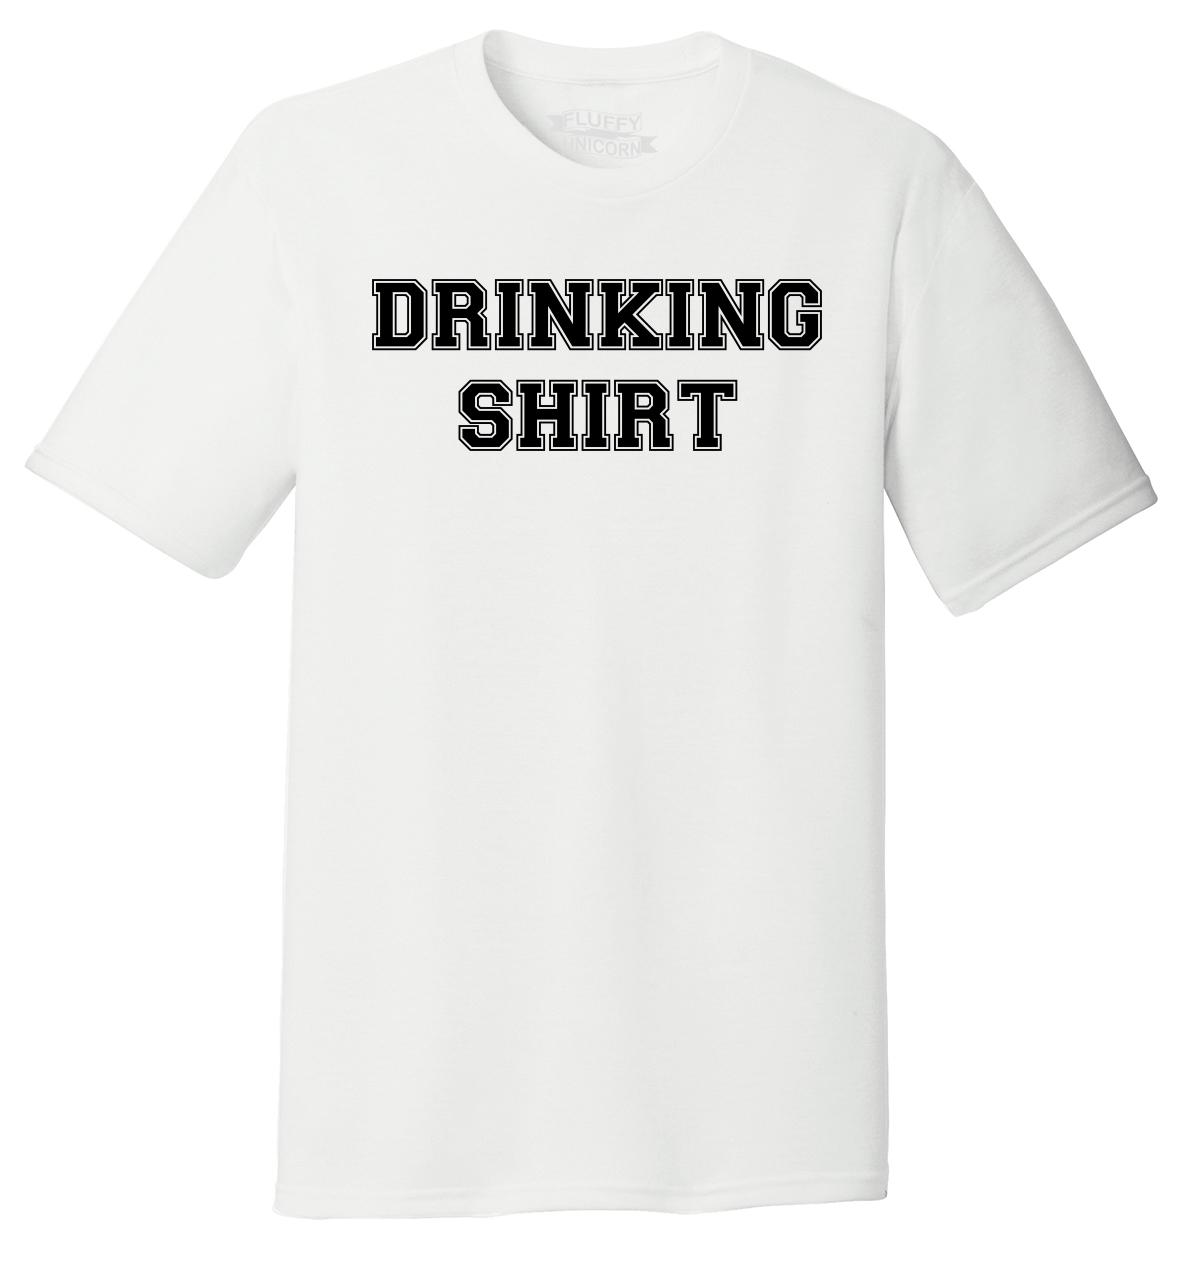 Mens Drinking Shirt Tri-Blend Tee Alcohol Beer Party St Pattys | eBay